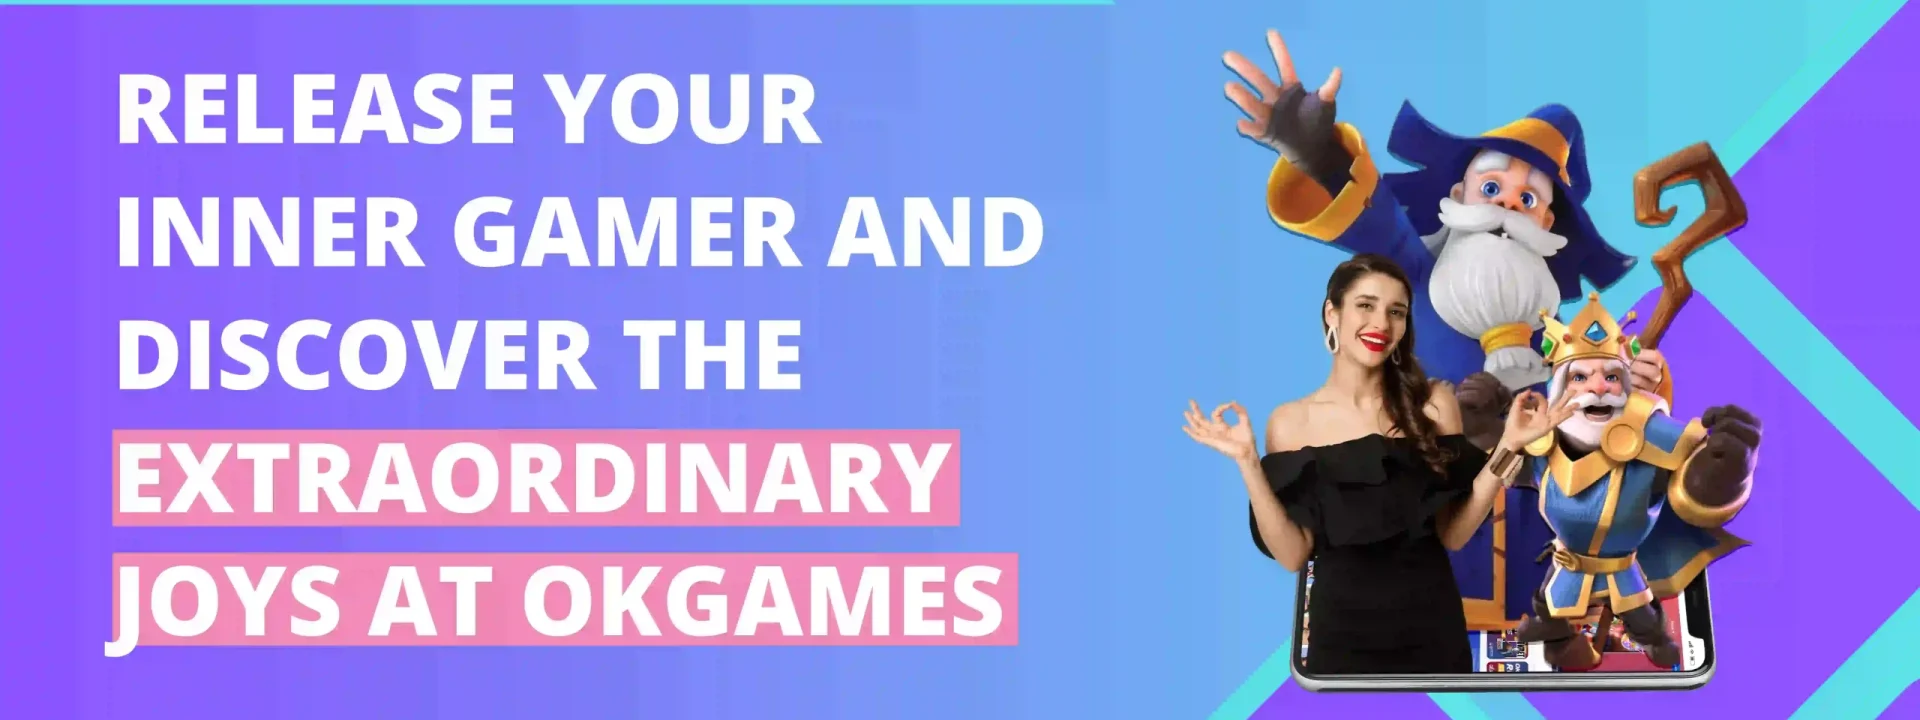 Release Your Inner Gamer and Discover the Extraordinary Joys at OKGames